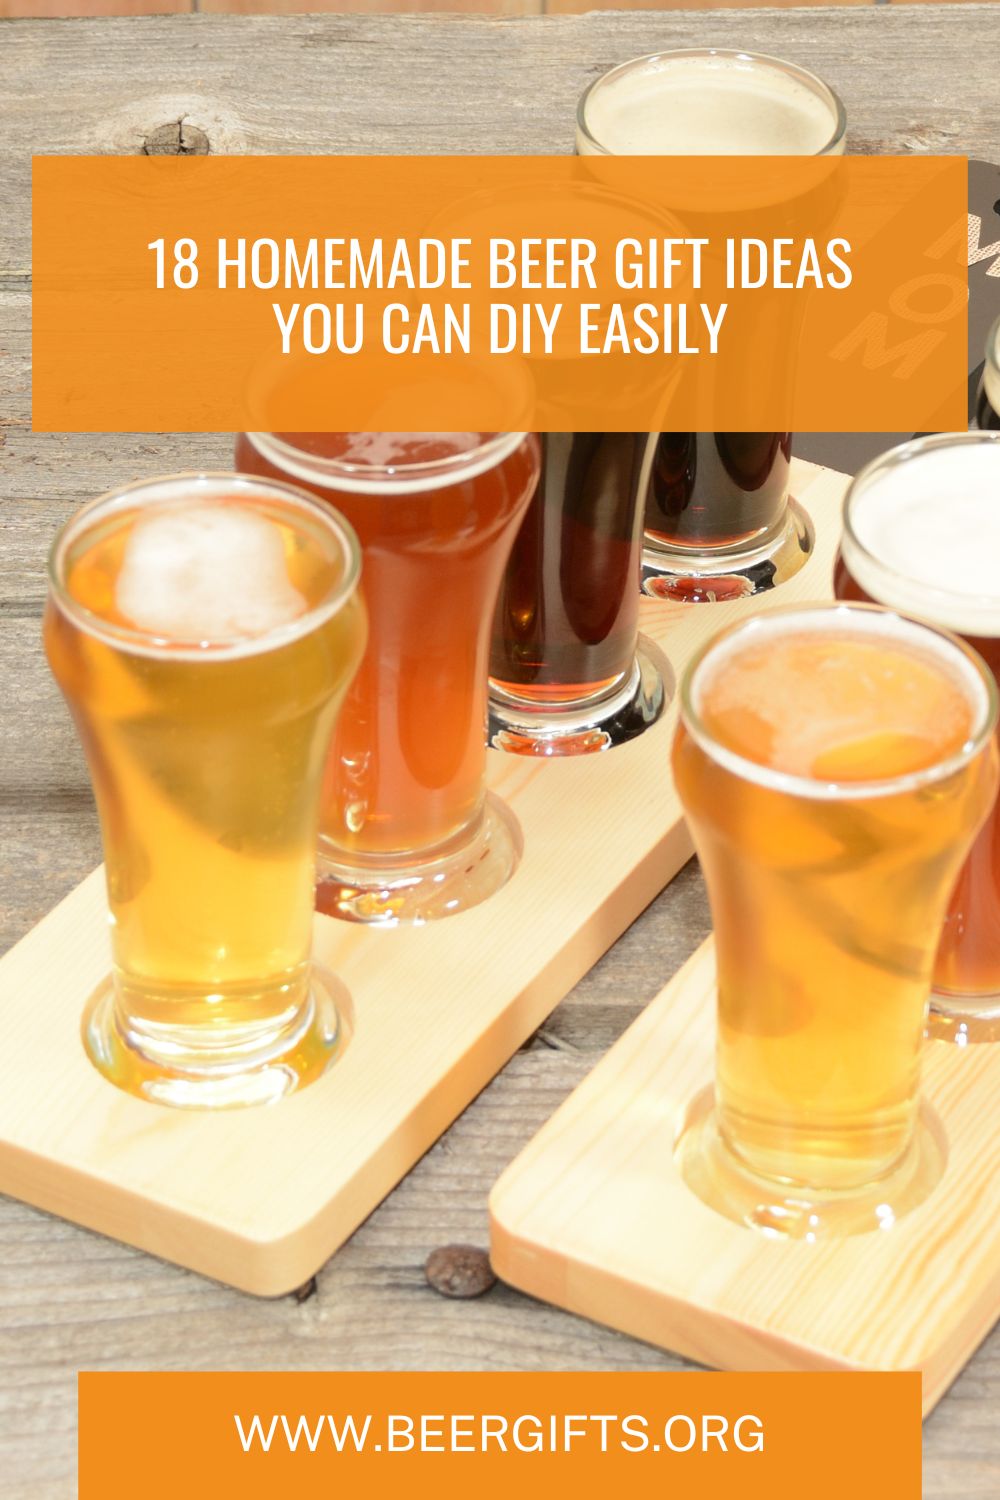 18 Homemade Beer Gift Ideas You Can DIY Easily 1